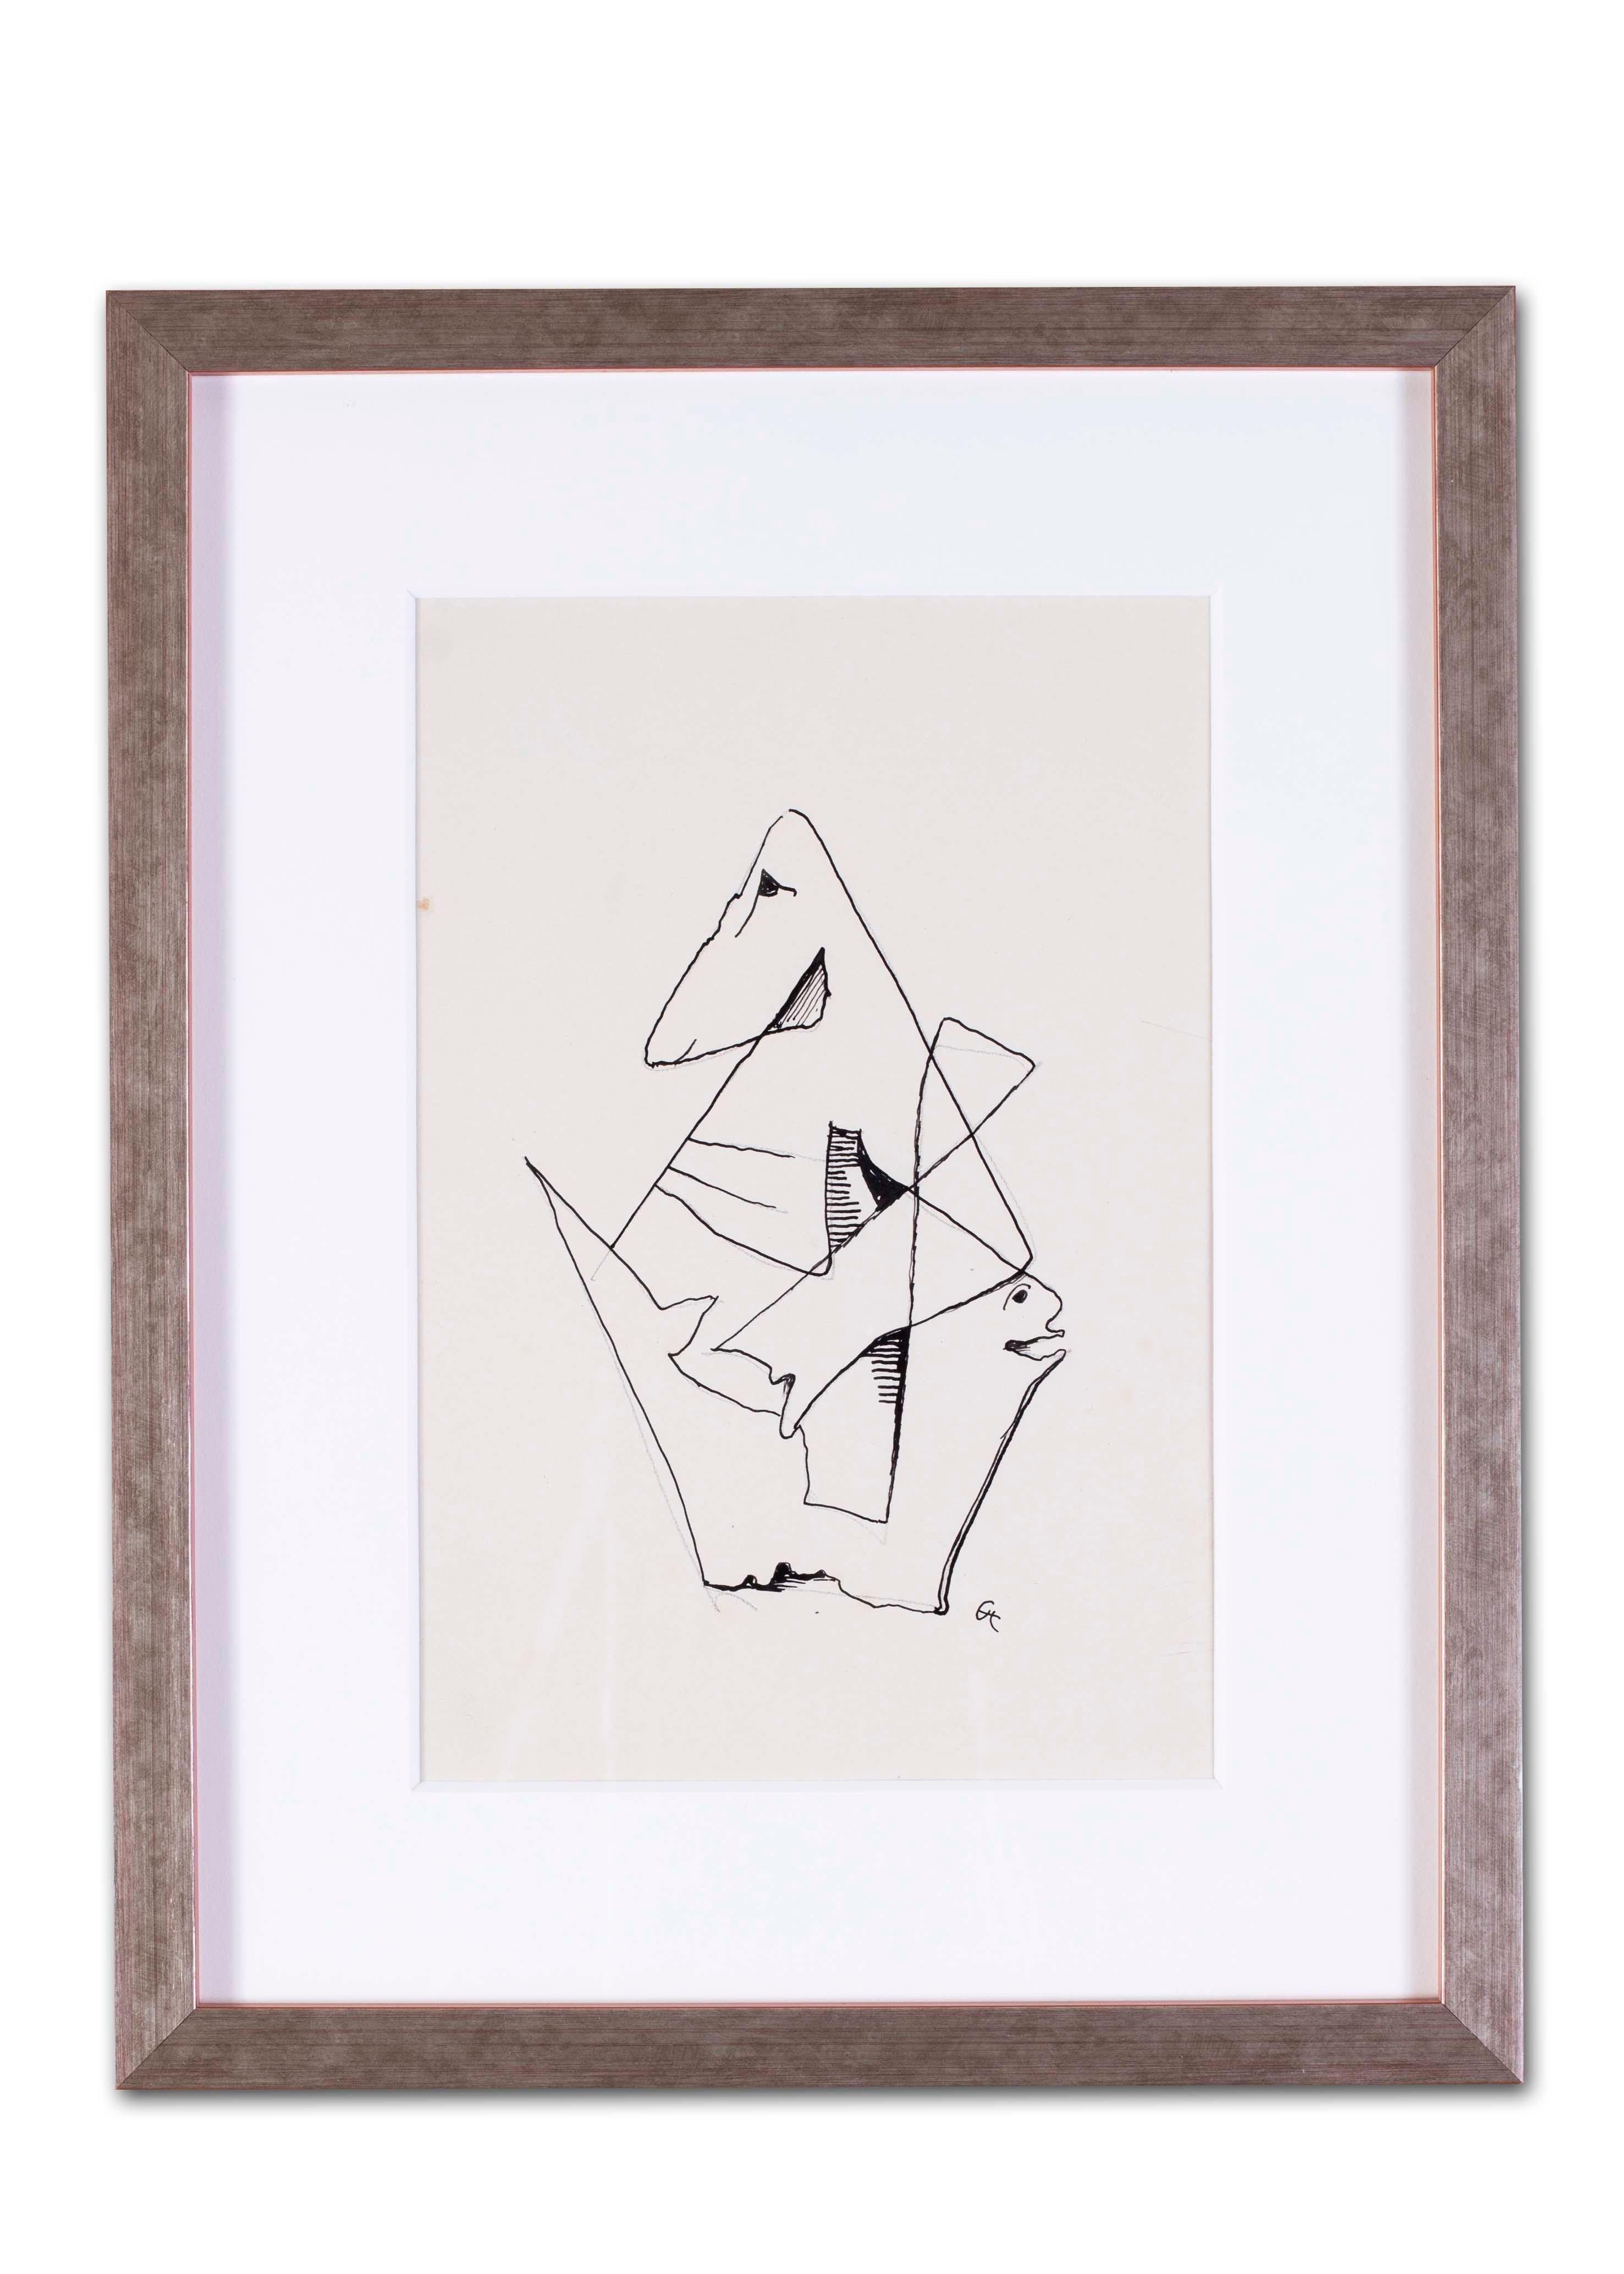 German Expressionist drawing of an abstracted form by Carl Hofer For Sale 7